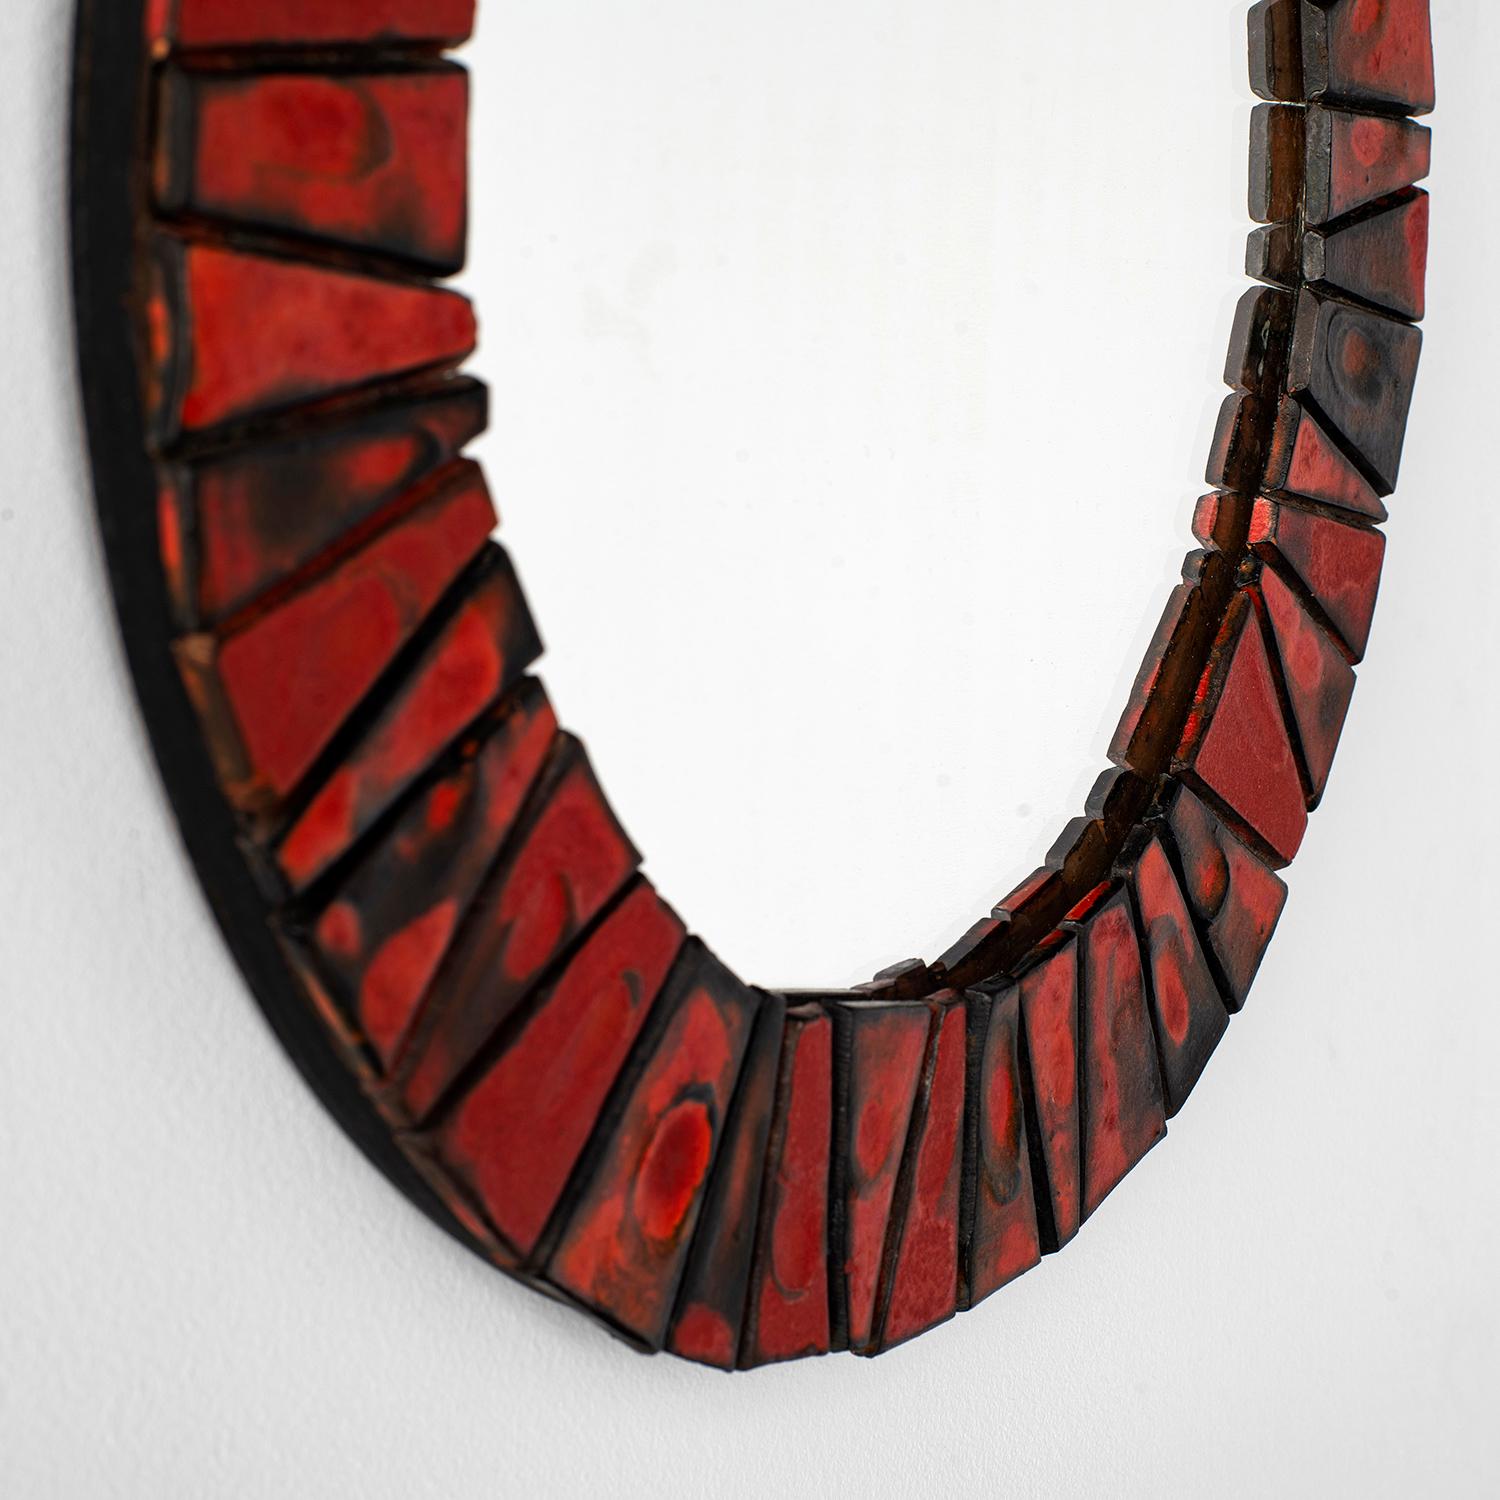 Late 20th Century Midcentury Red Ceramic Tiled Round Wall Mirror  For Sale